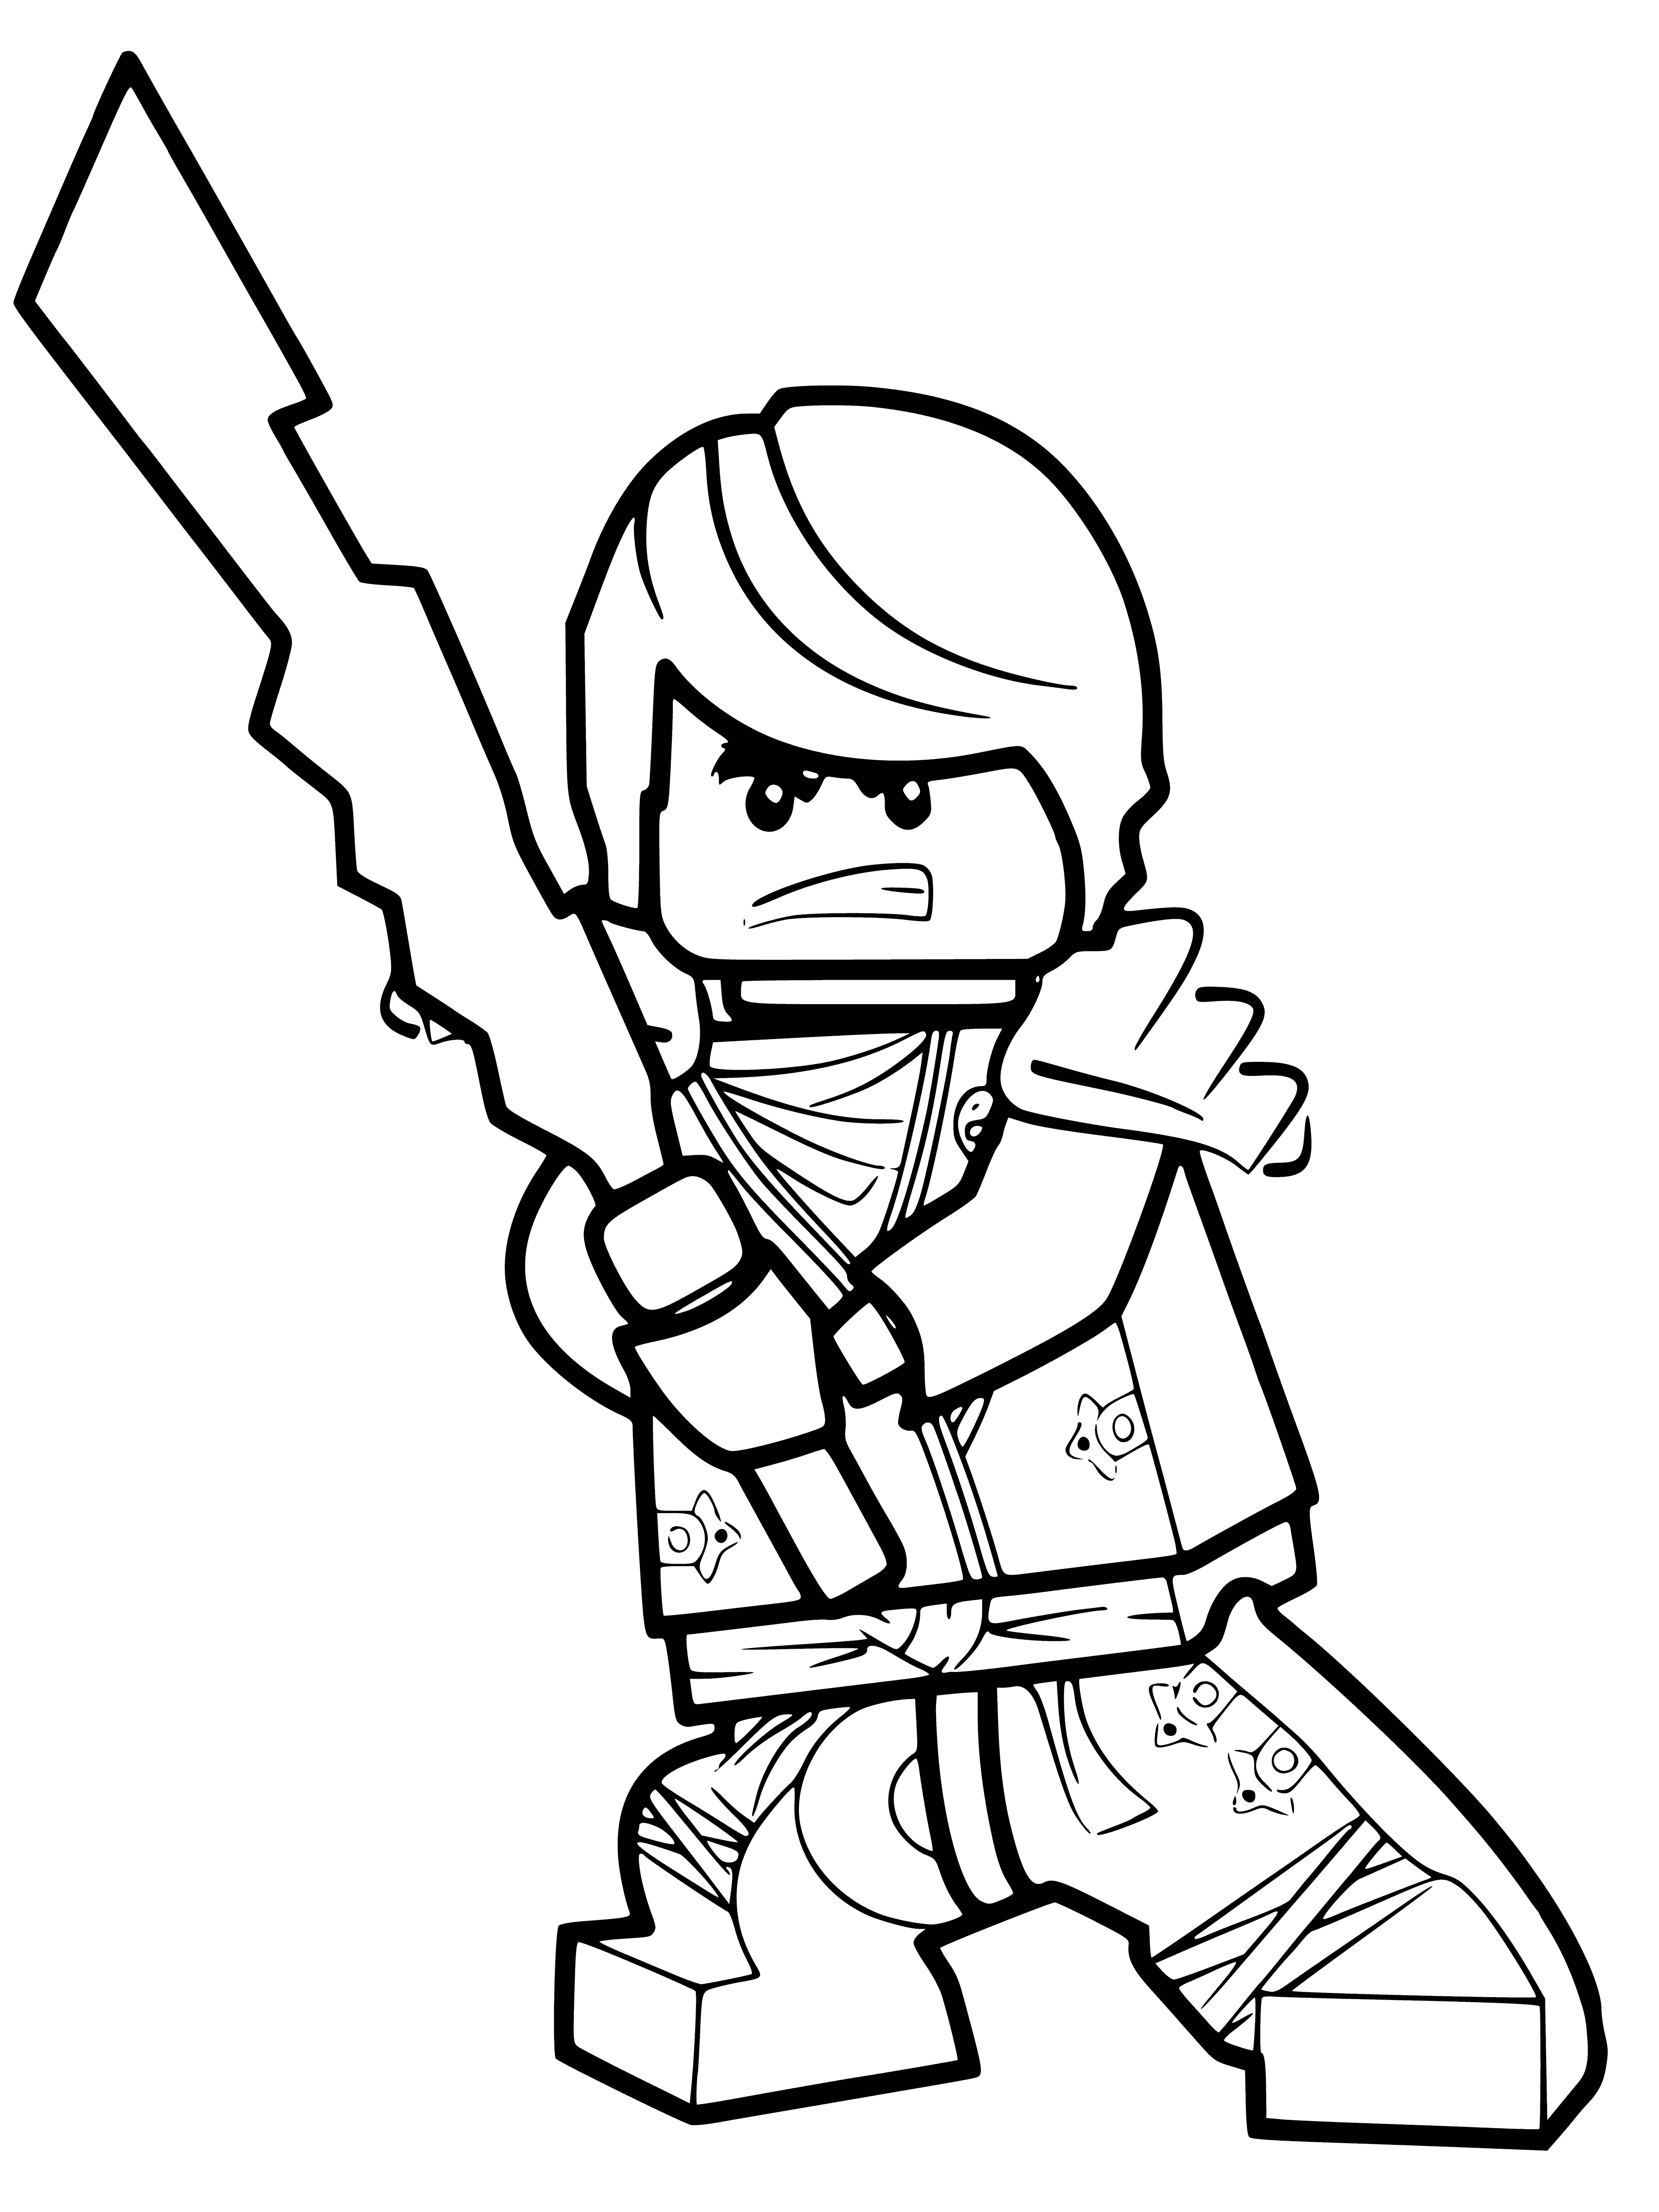 coloring page: 4 Lego ninjas in different fighting stances (katanas, nunchucks & empty-handed) against a wall with "LEGO NINJAGO" printed in yellow.